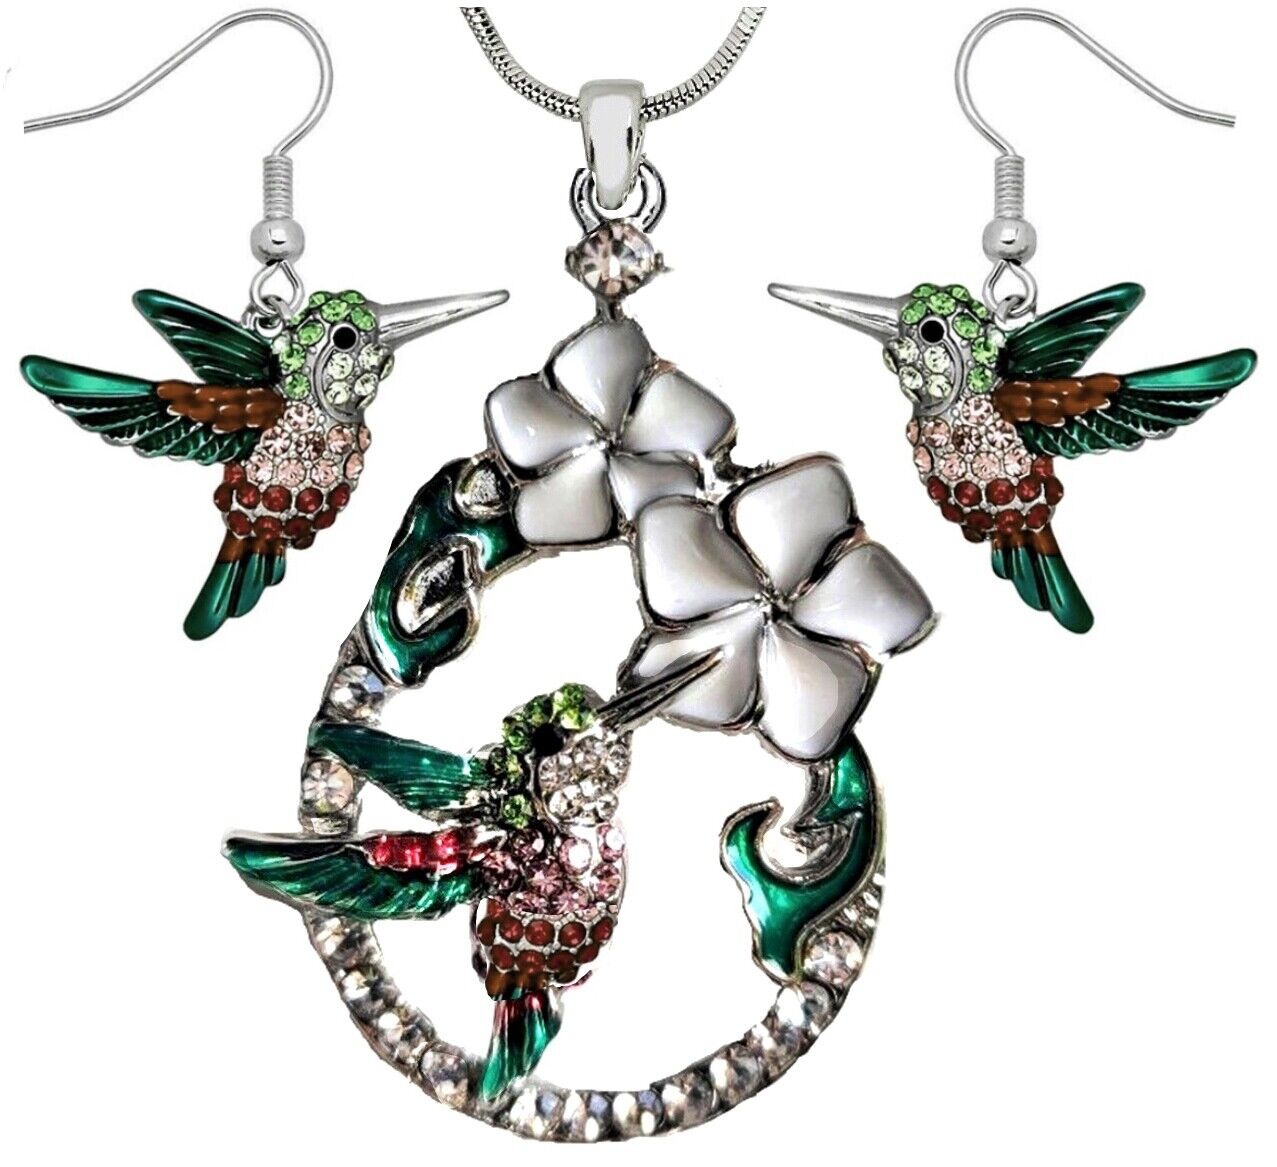 Gorgeous Hummingbird Pendant Necklace and Earrings Set 21" Chain Bird Theme